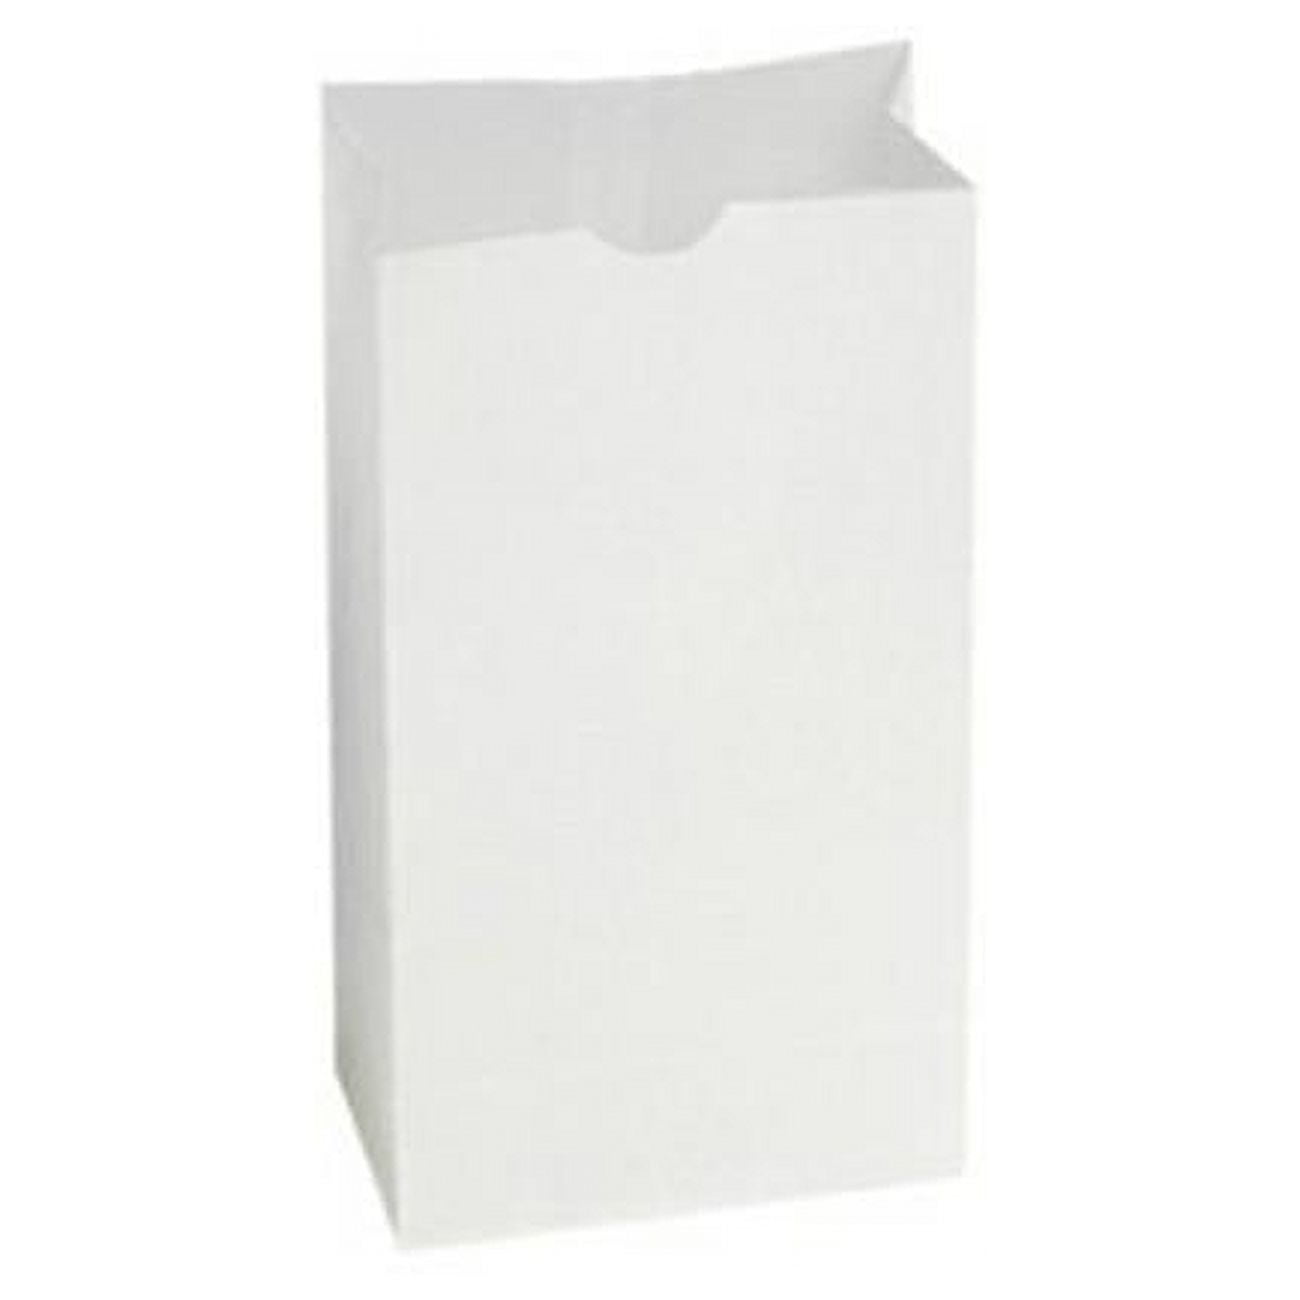 300294 Cpc 4 Lbs Papercon Sos Dubl-wax Coated Paper Bakery Bag, White - Case Of 1000